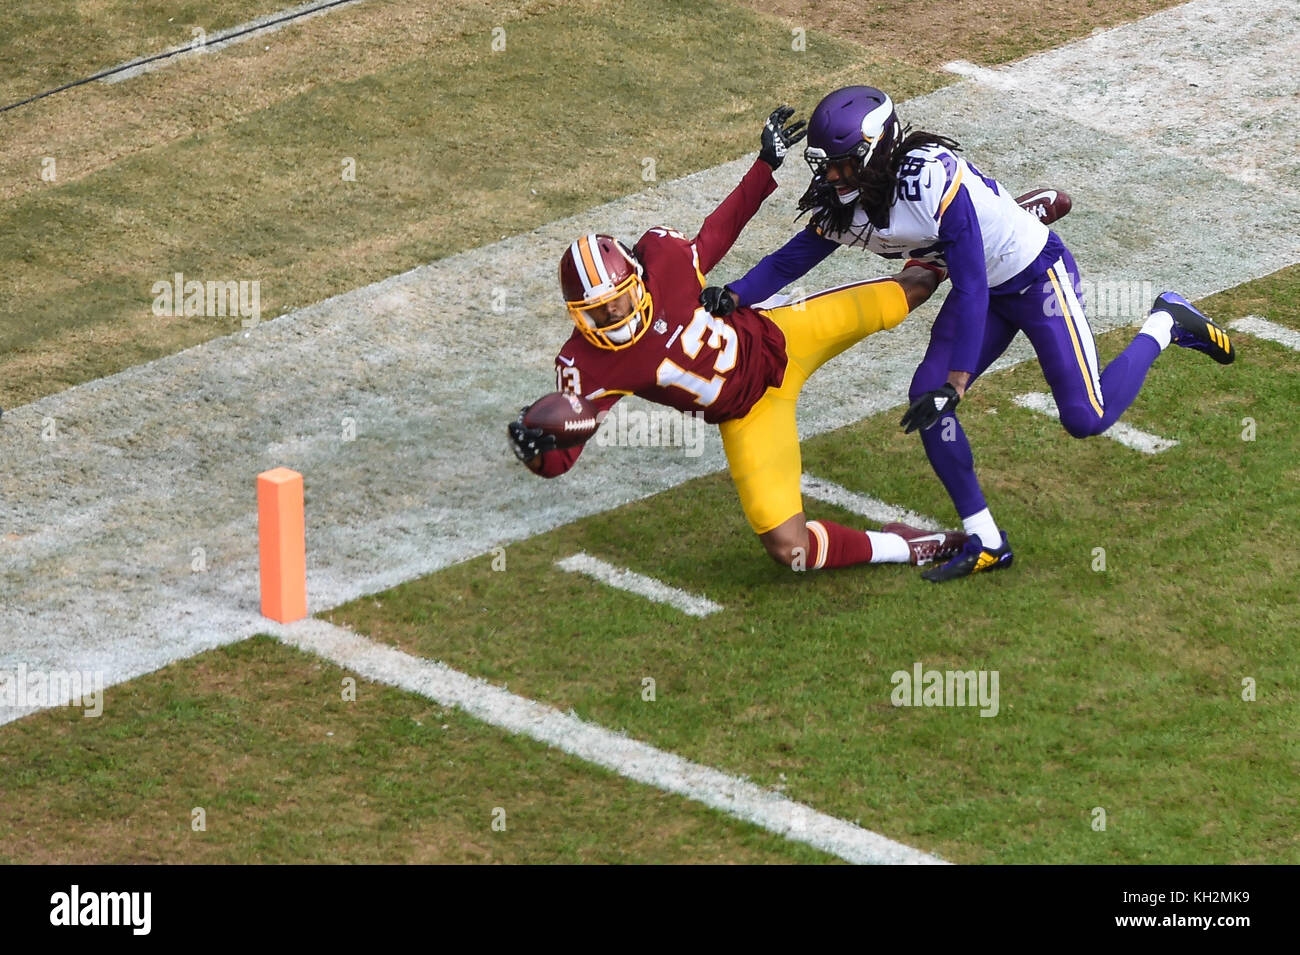 Landover, MD, USA. 12th Nov, 2017. Washington Redskin wide receiver Maurice Harris (13) catches a touchdown pass in the first quarter while Minnesota Vikings cornerback Trae Waynes (26) defends during the matchup between the Minnesota Vikings and the Washington Redskins at FedEx Field in Landover, MD. Credit: csm/Alamy Live News Stock Photo